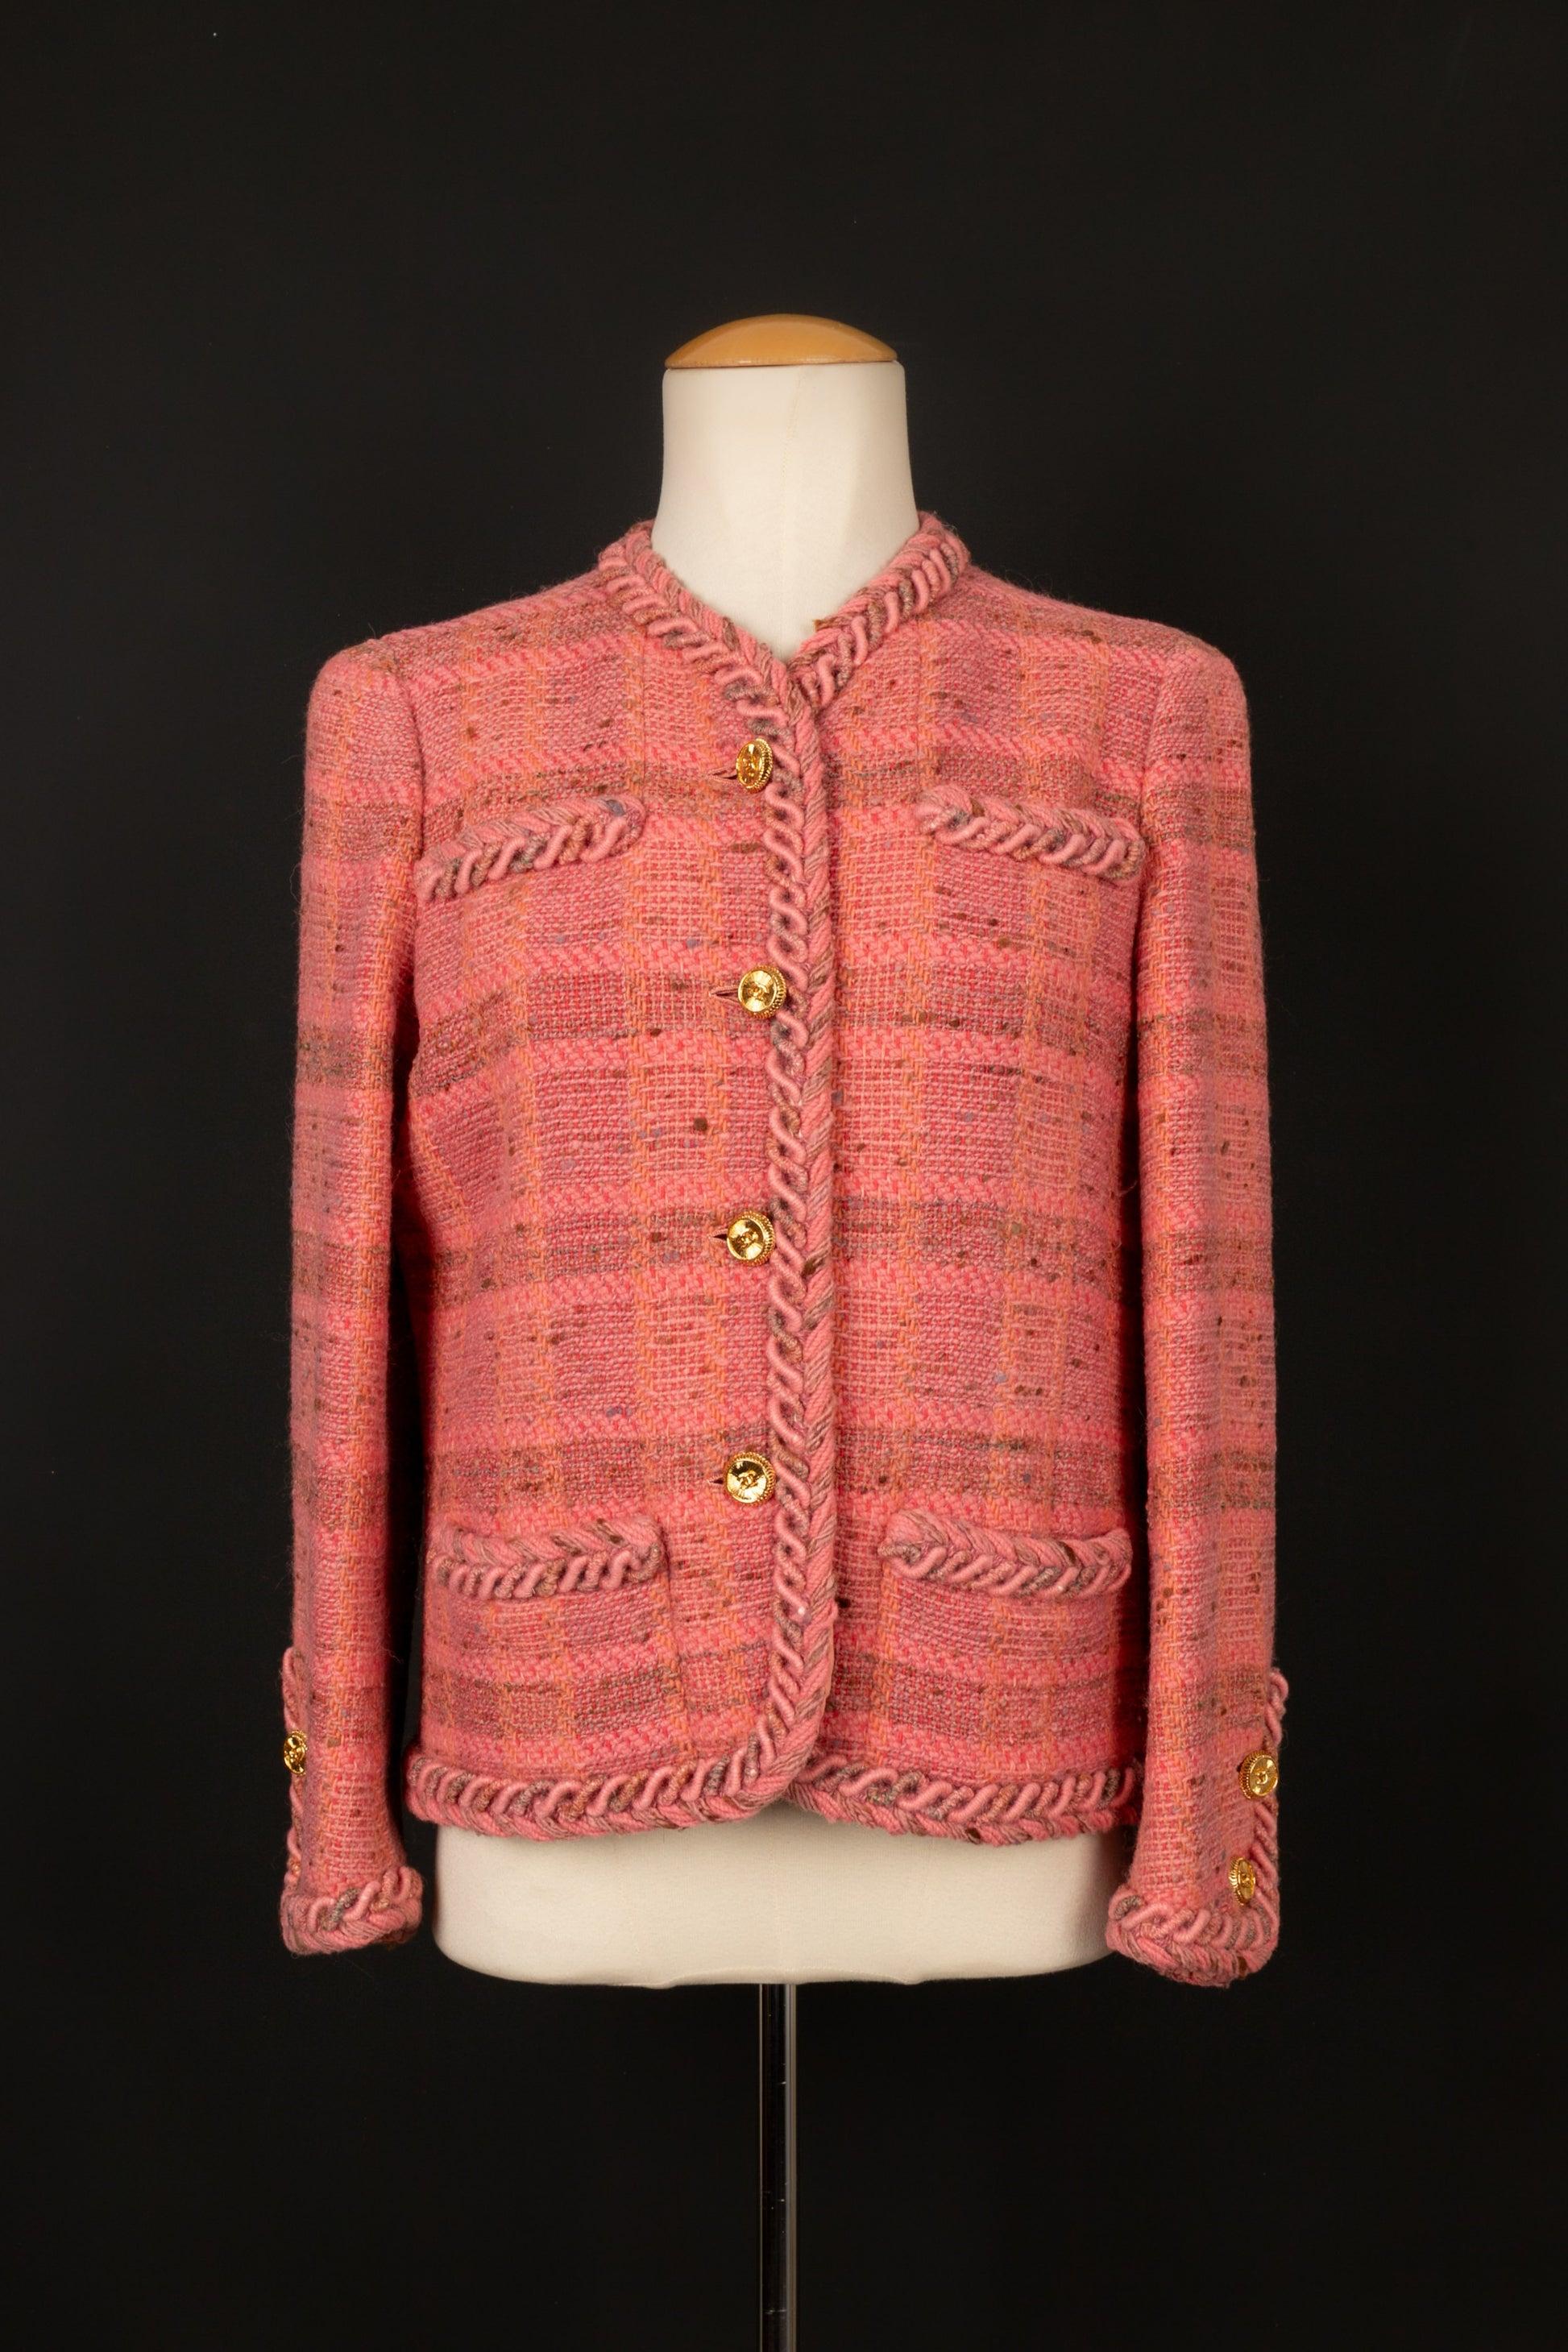 Women's Chanel Haute Couture Suit Set of Pink-Tone Tweed Jacket and Skirt